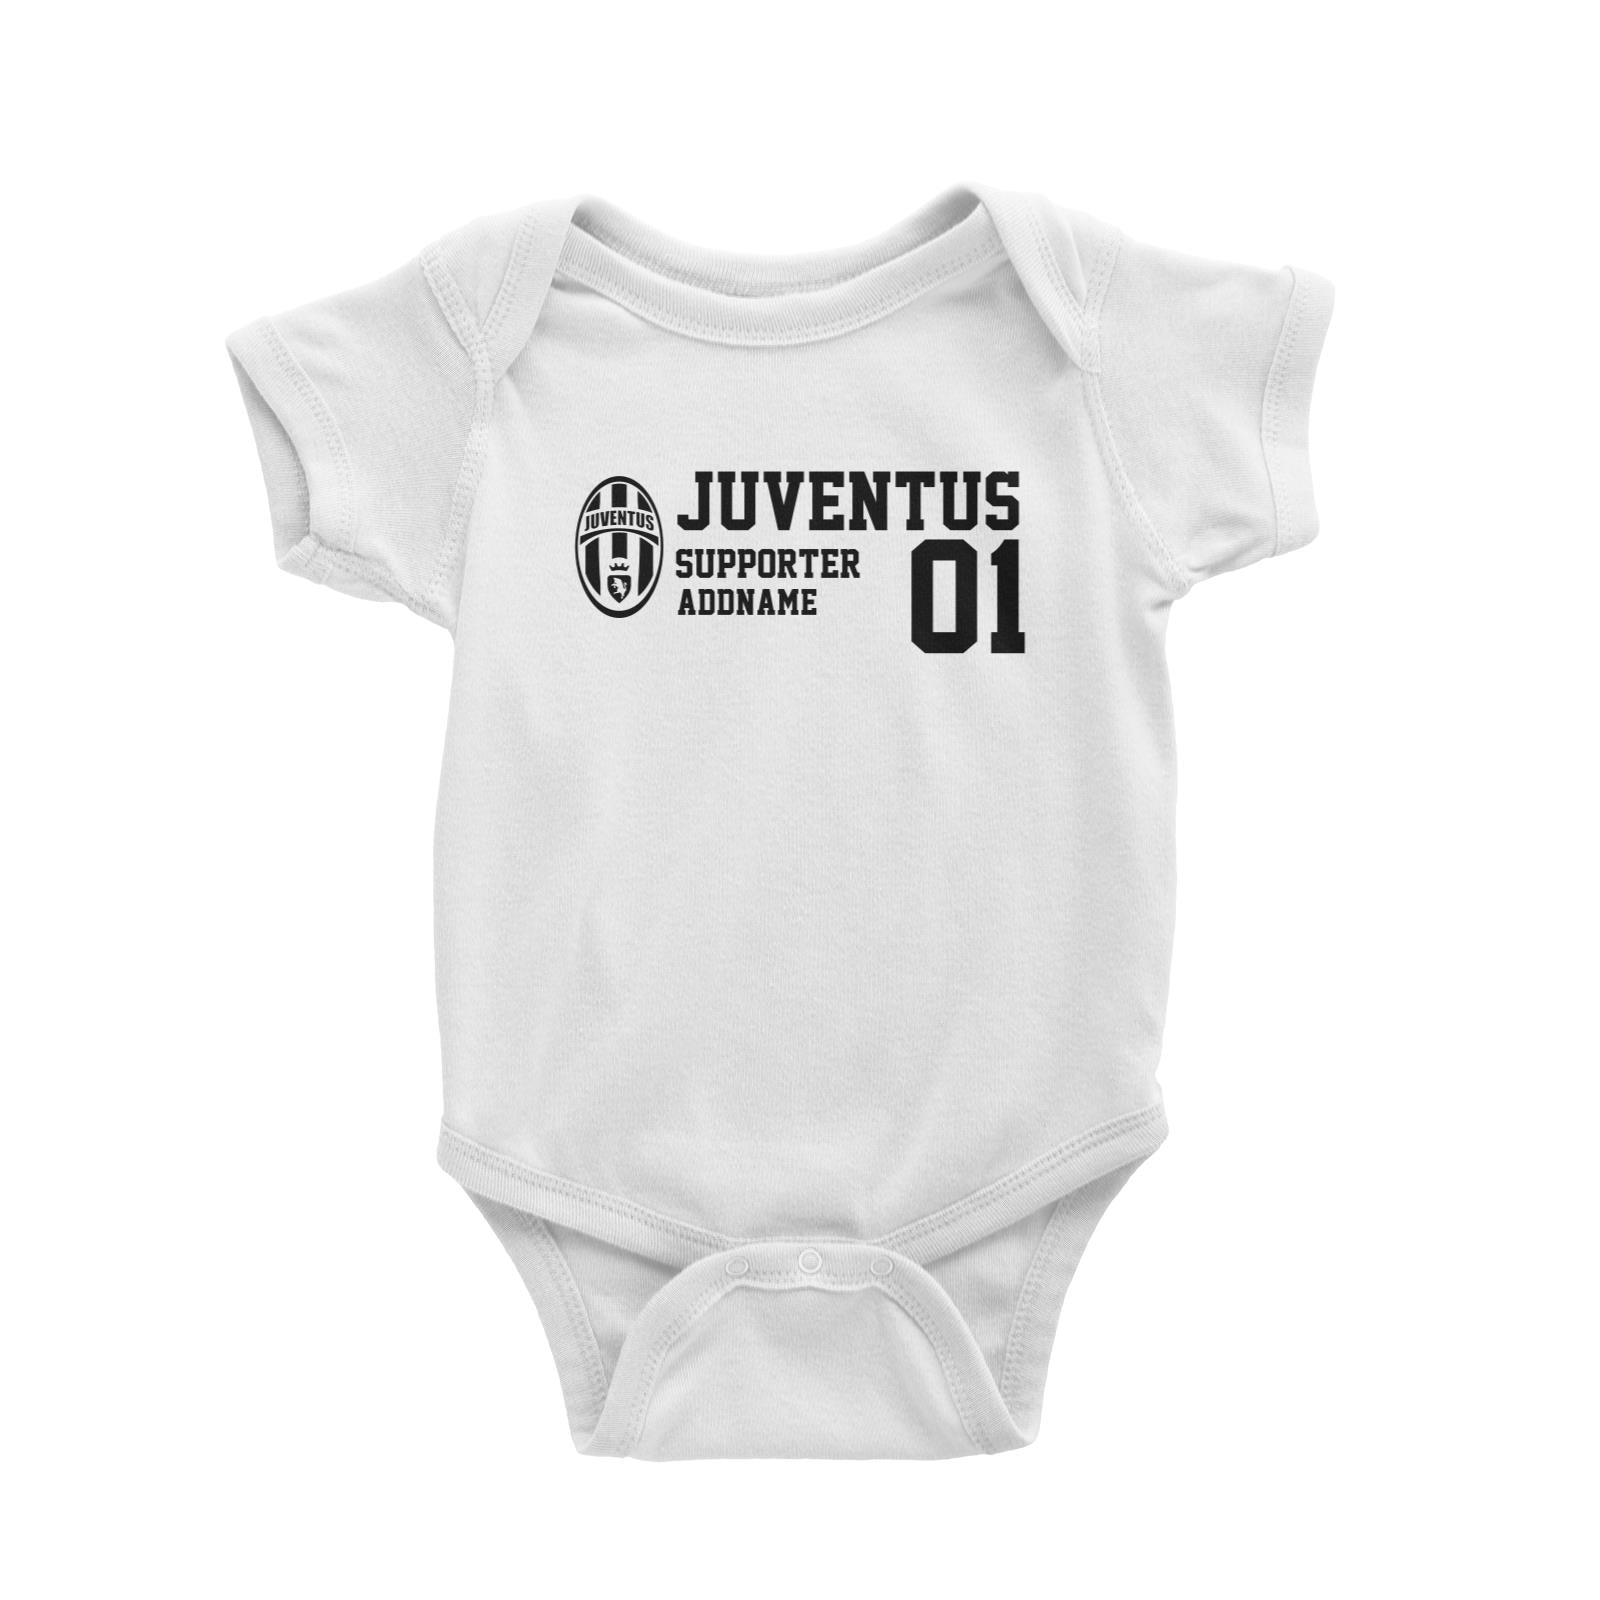 Juventus Football Supporter Addname Baby Romper